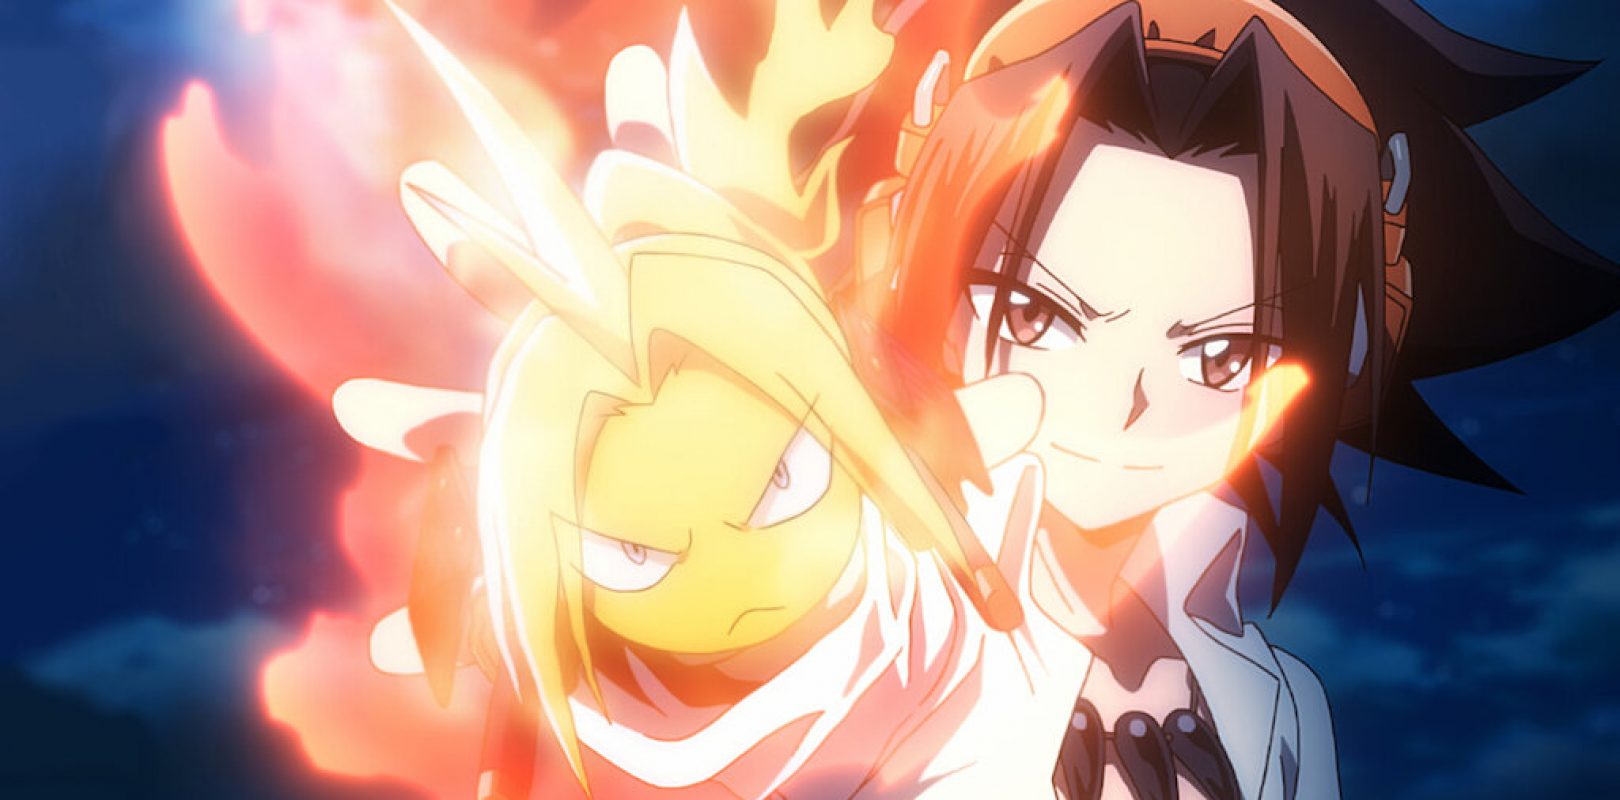 Shaman King, on which platforms can you watch the anime